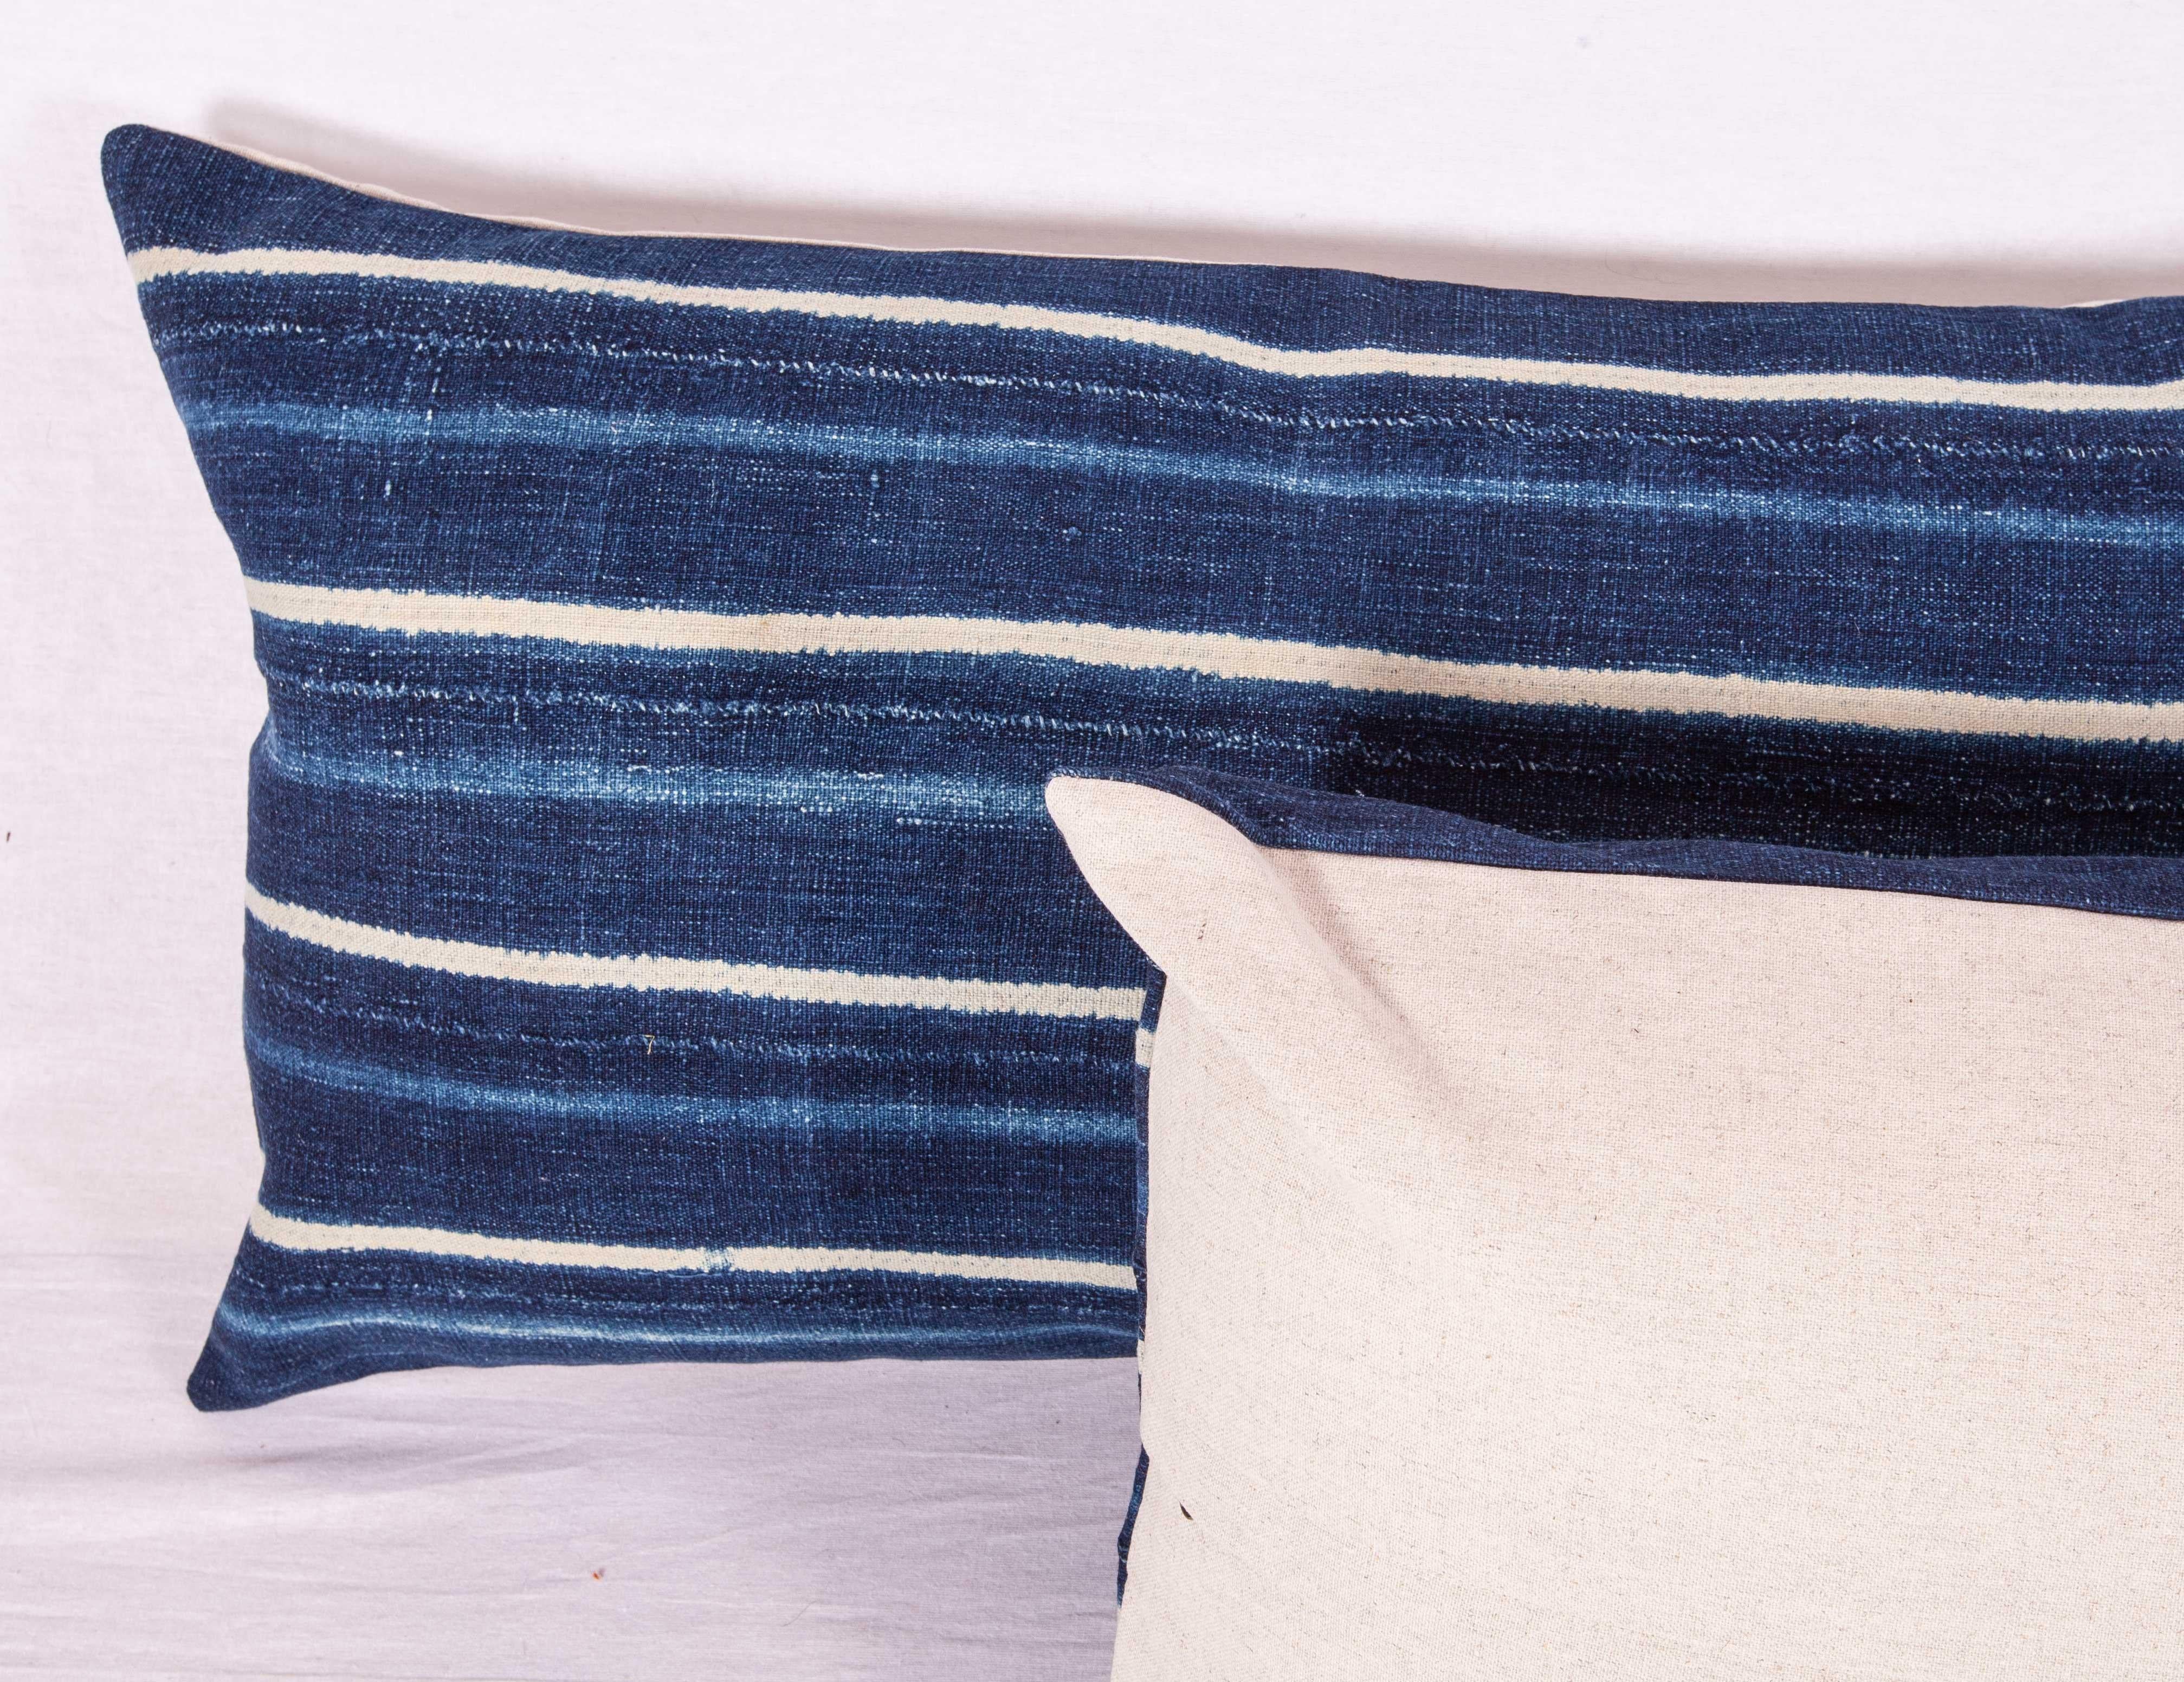 Hand-Woven Vintage Indigo Pillow / Cushion Covers Fashioned from a Cloth from Mali Africa